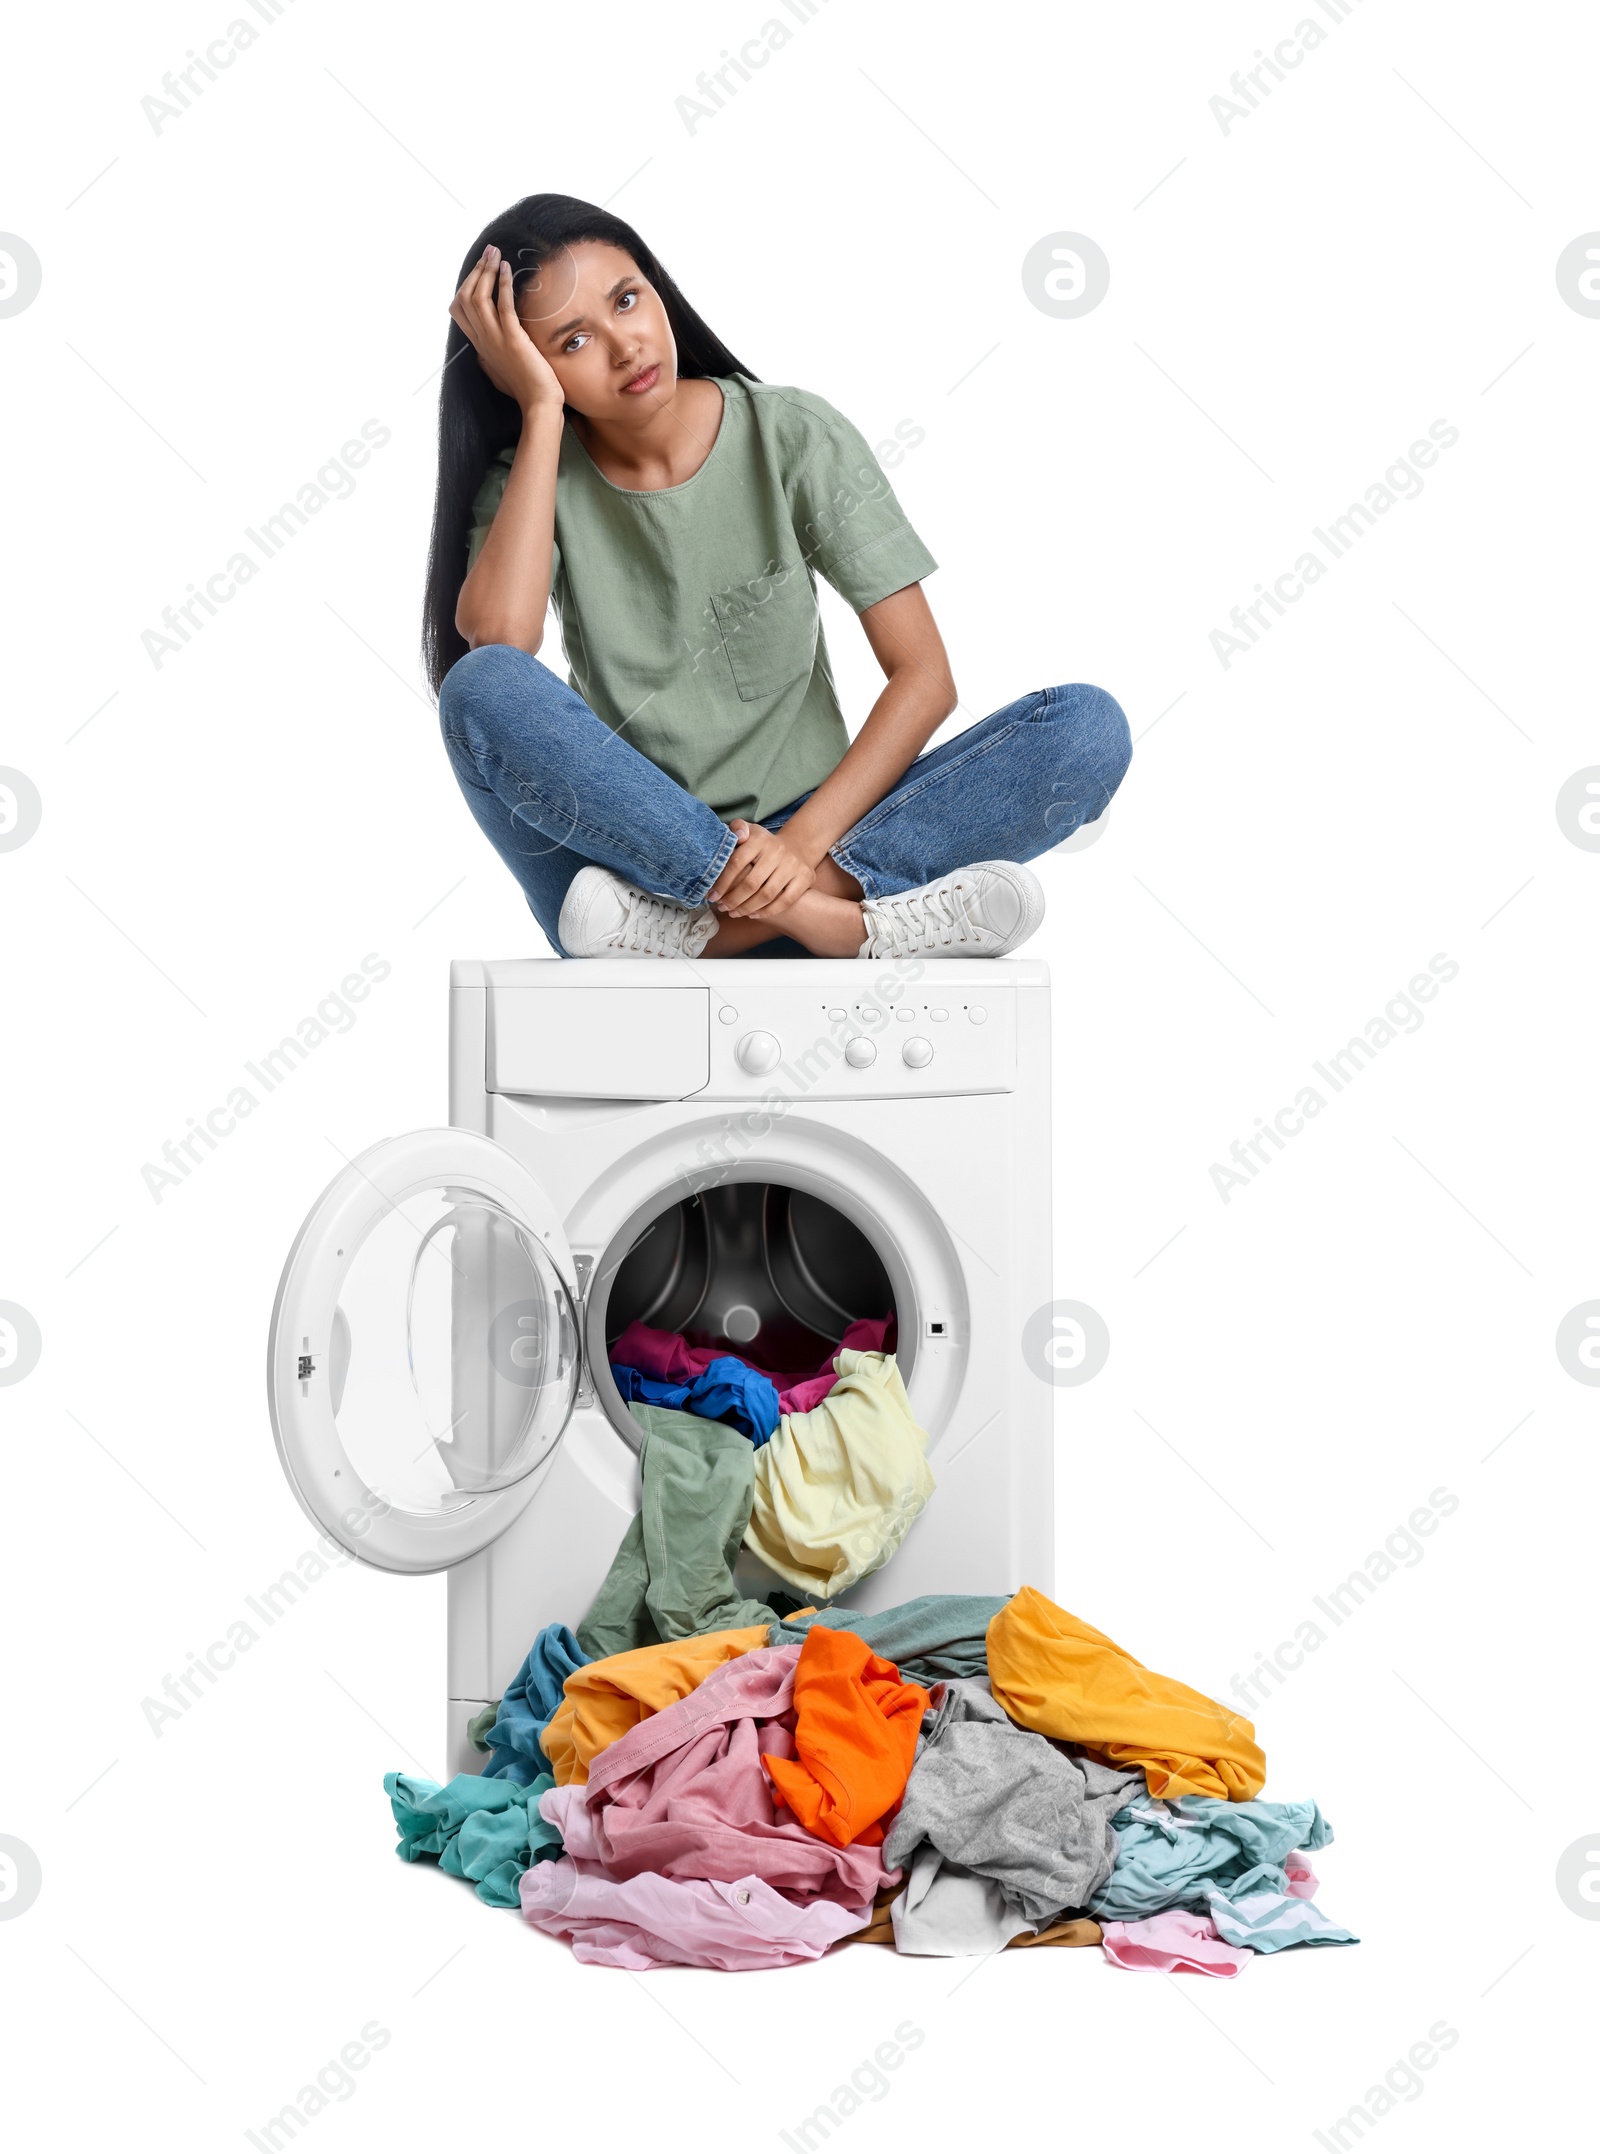 Photo of Confused woman sitting on washing machine with pile of laundry against white background